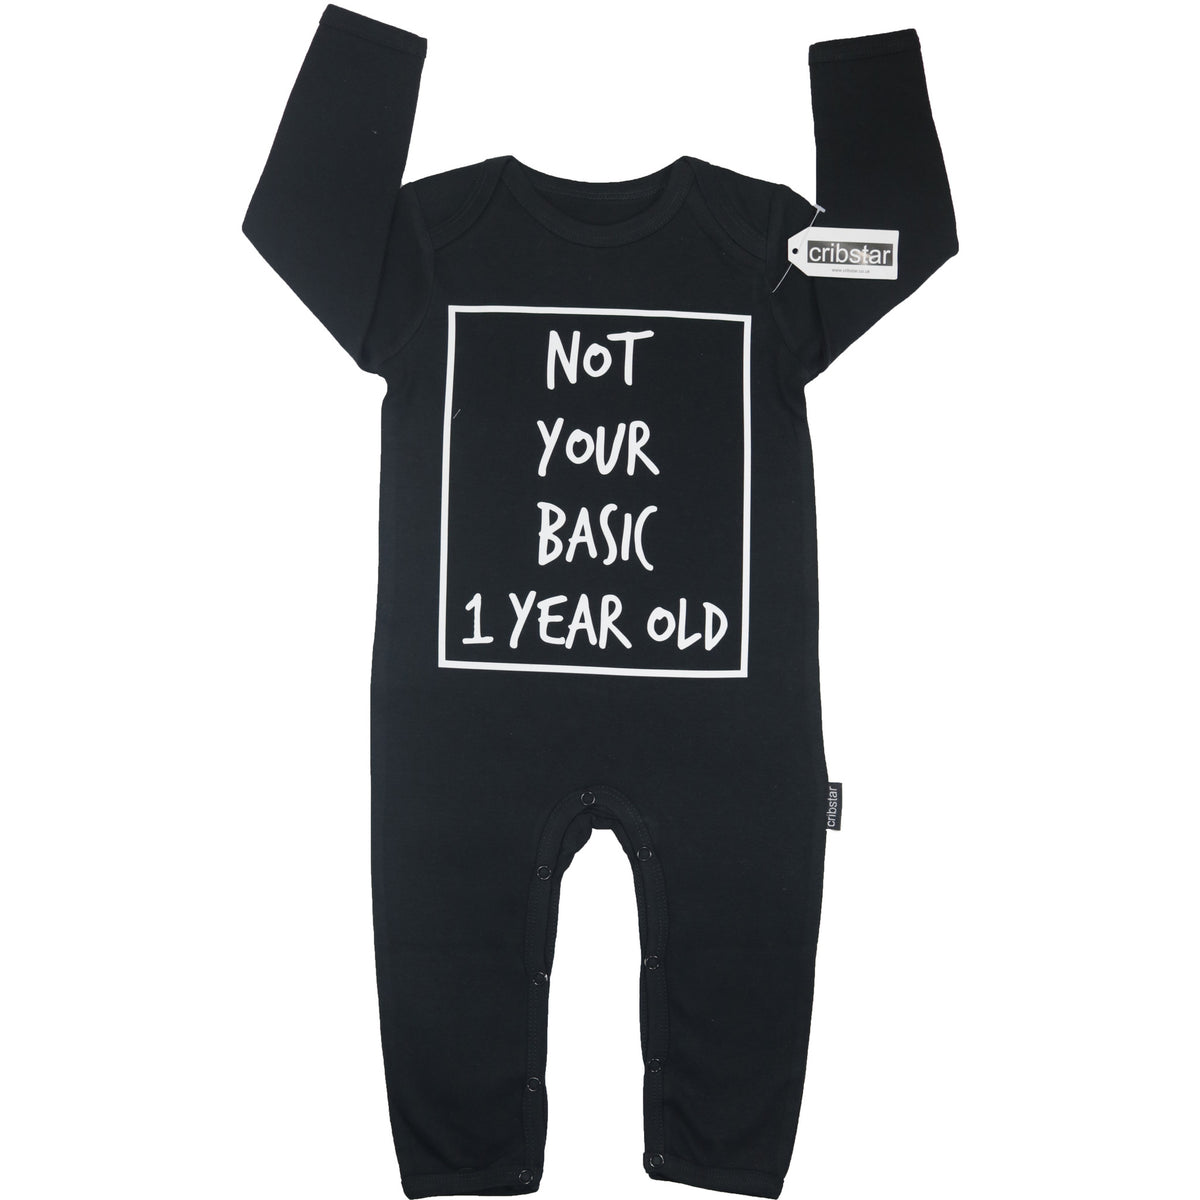 Not Your Basic 1 Year Old Baby Romper